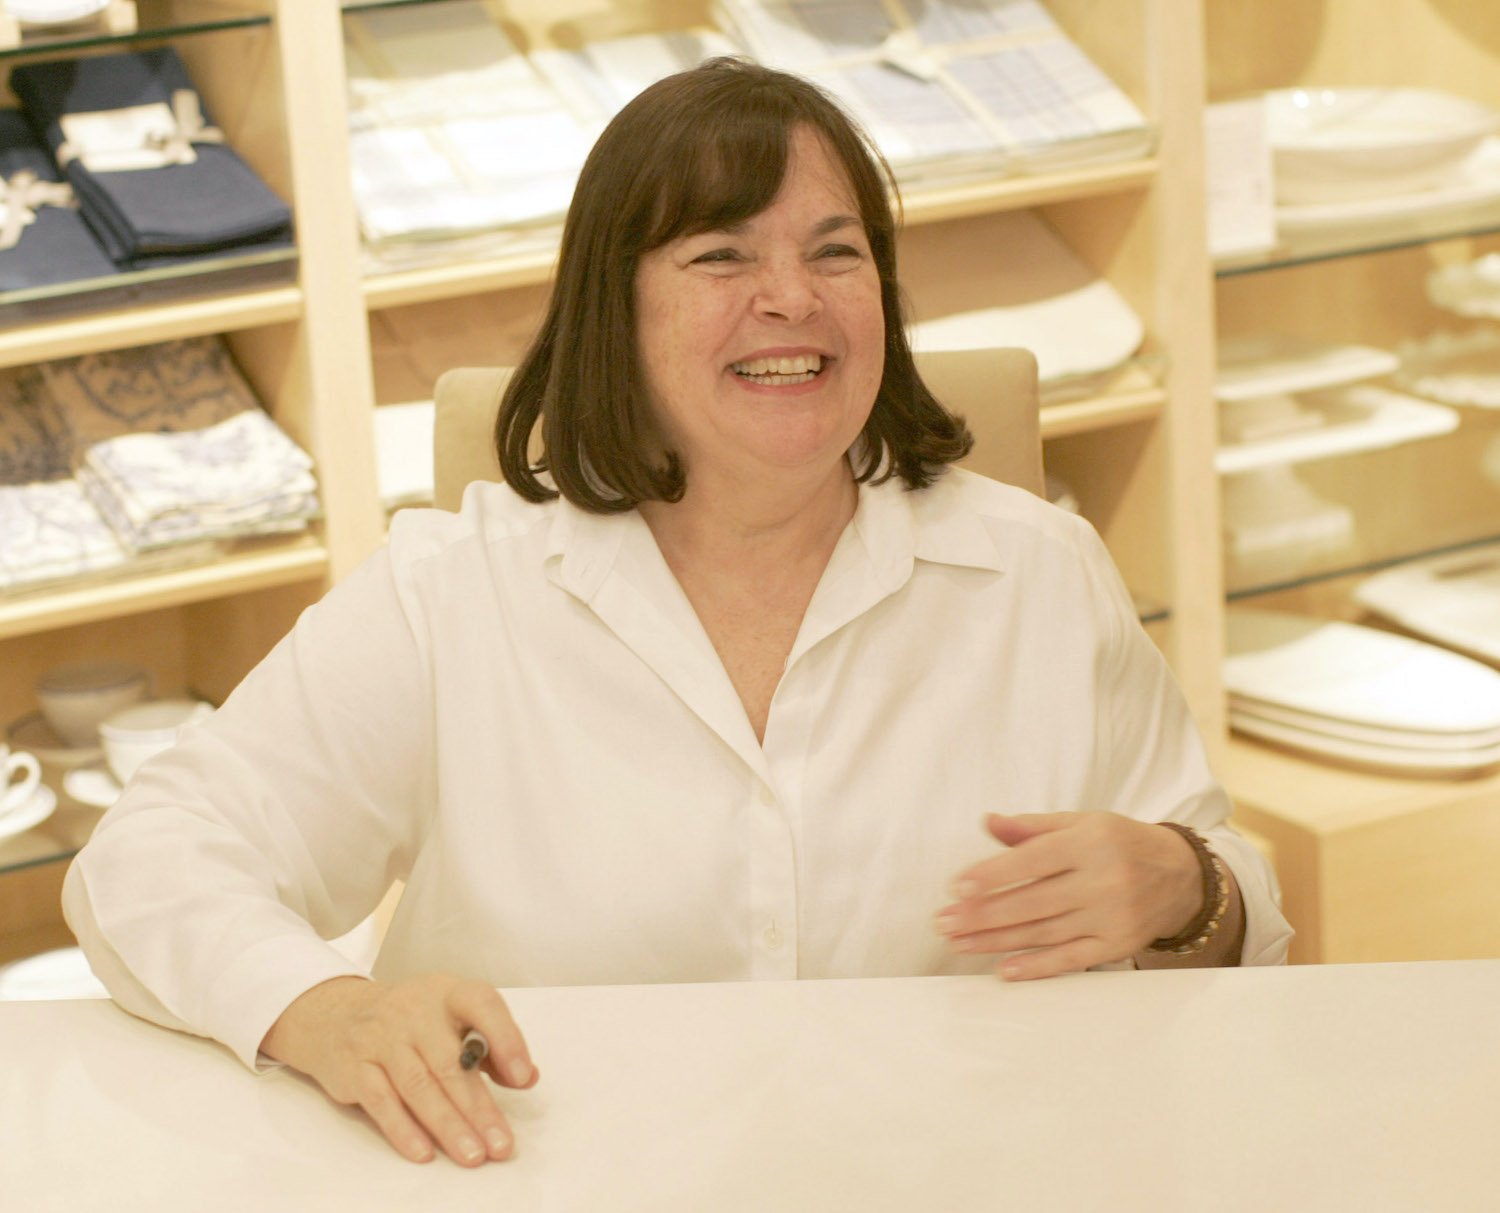 Ina Garten attends The Barefoot Contessa book signing at William Sonoma on November 14, 2008